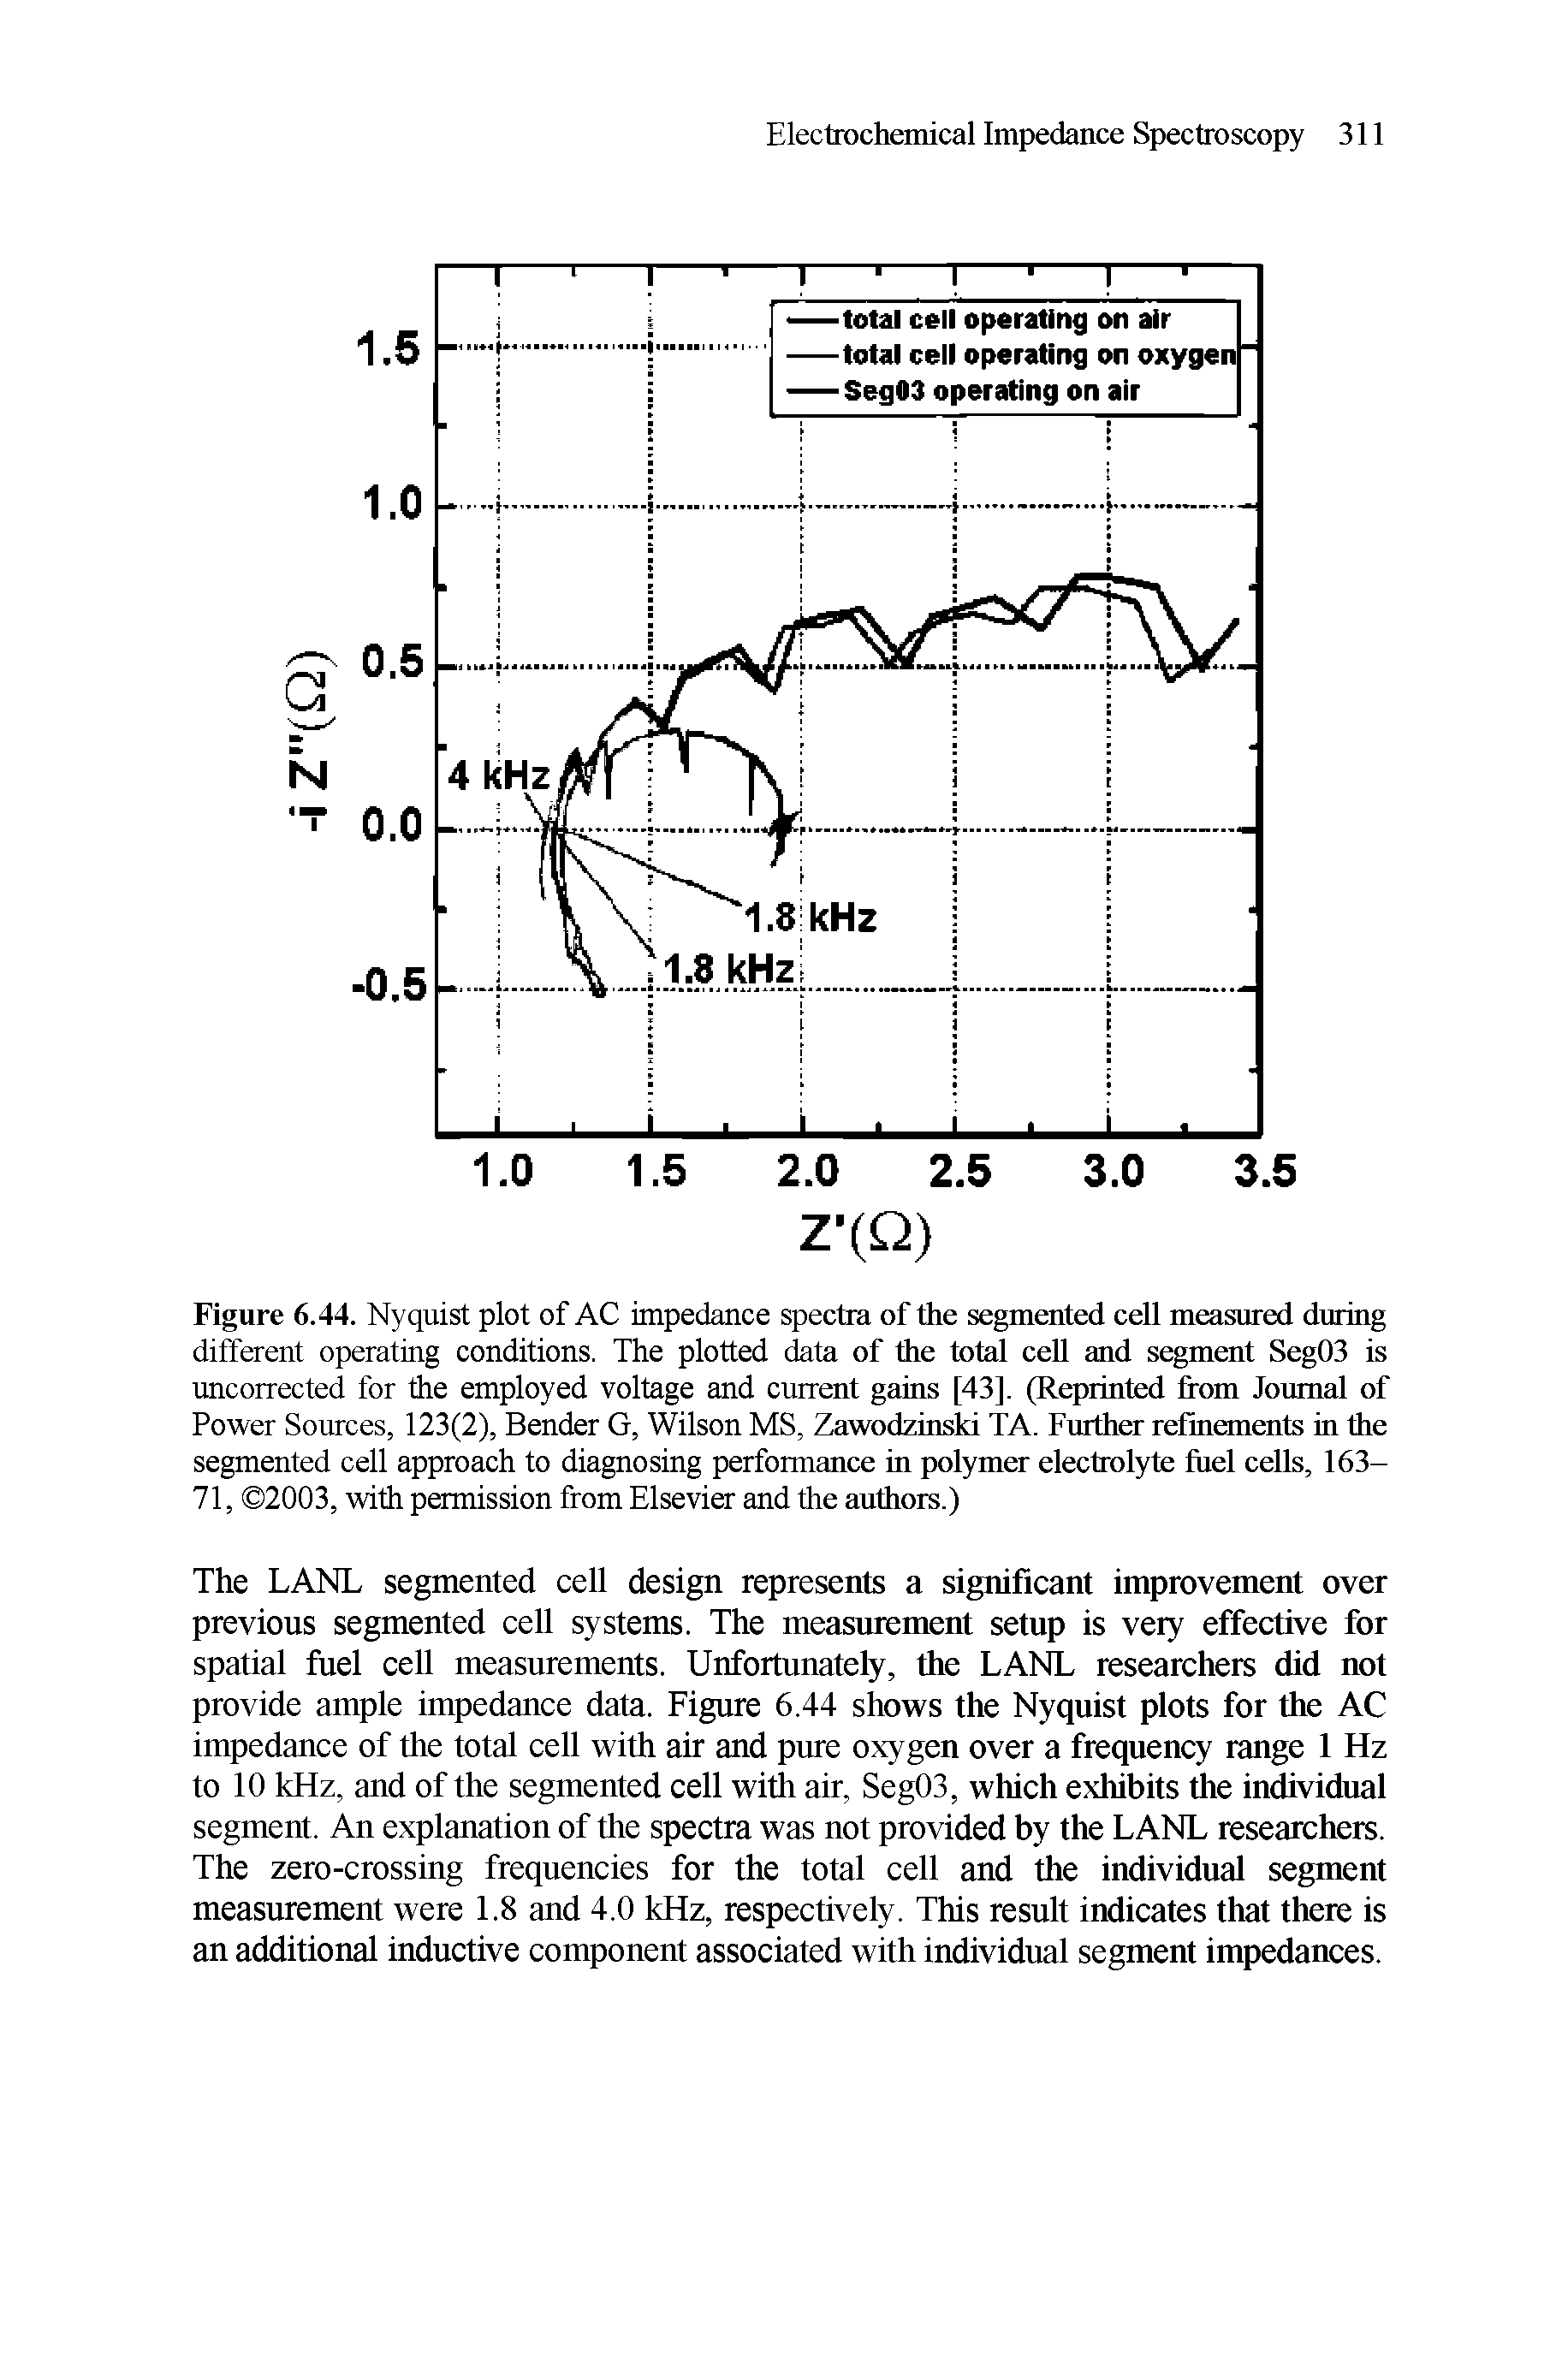 Figure 6.44. Nyquist plot of AC impedance spectra of the segmented cell measured during different operating conditions. The plotted data of the total cell and segment Seg03 is uncorrected for the employed voltage and current gains [43], (Reprinted from Journal of Power Sources, 123(2), Bender G, Wilson MS, Zawodzinski TA. Further refinements in the segmented cell approach to diagnosing performance in polymer electrolyte fuel cells, 163— 71, 2003, with permission from Elsevier and the authors.)...